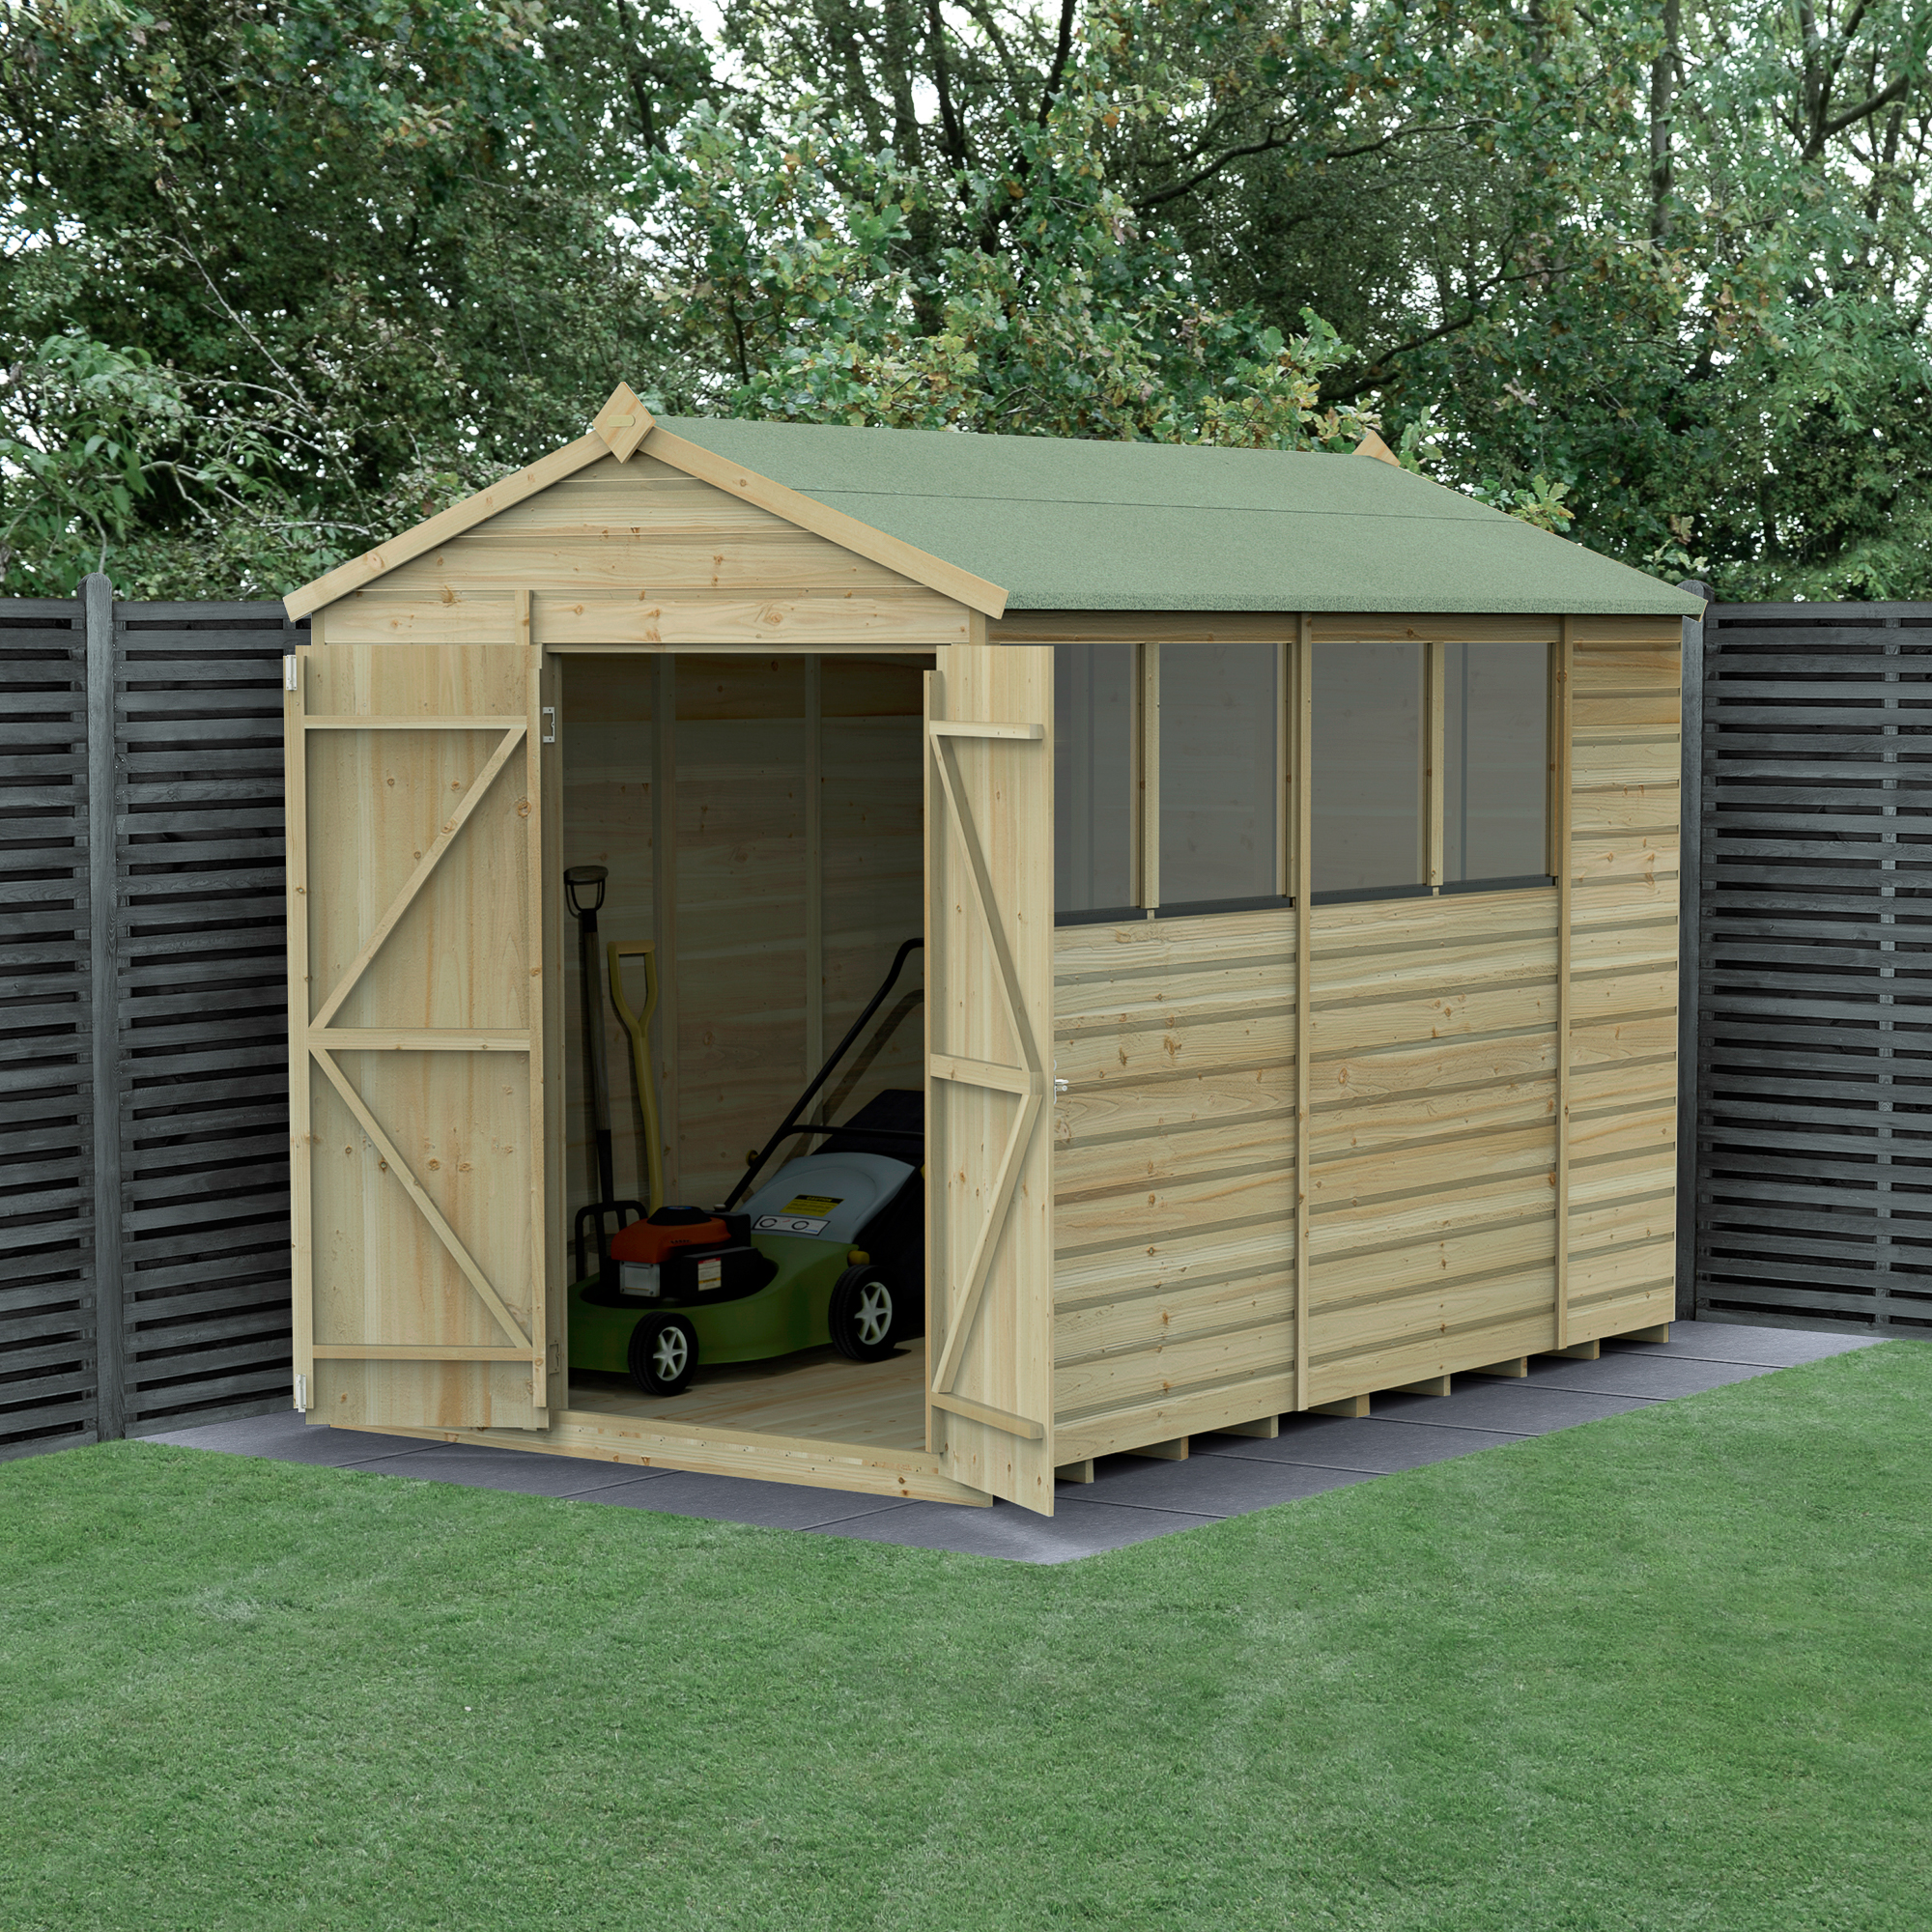 Forest Garden Beckwood 6 x 10ft Apex Shiplap Pressure Treated Double Door Shed